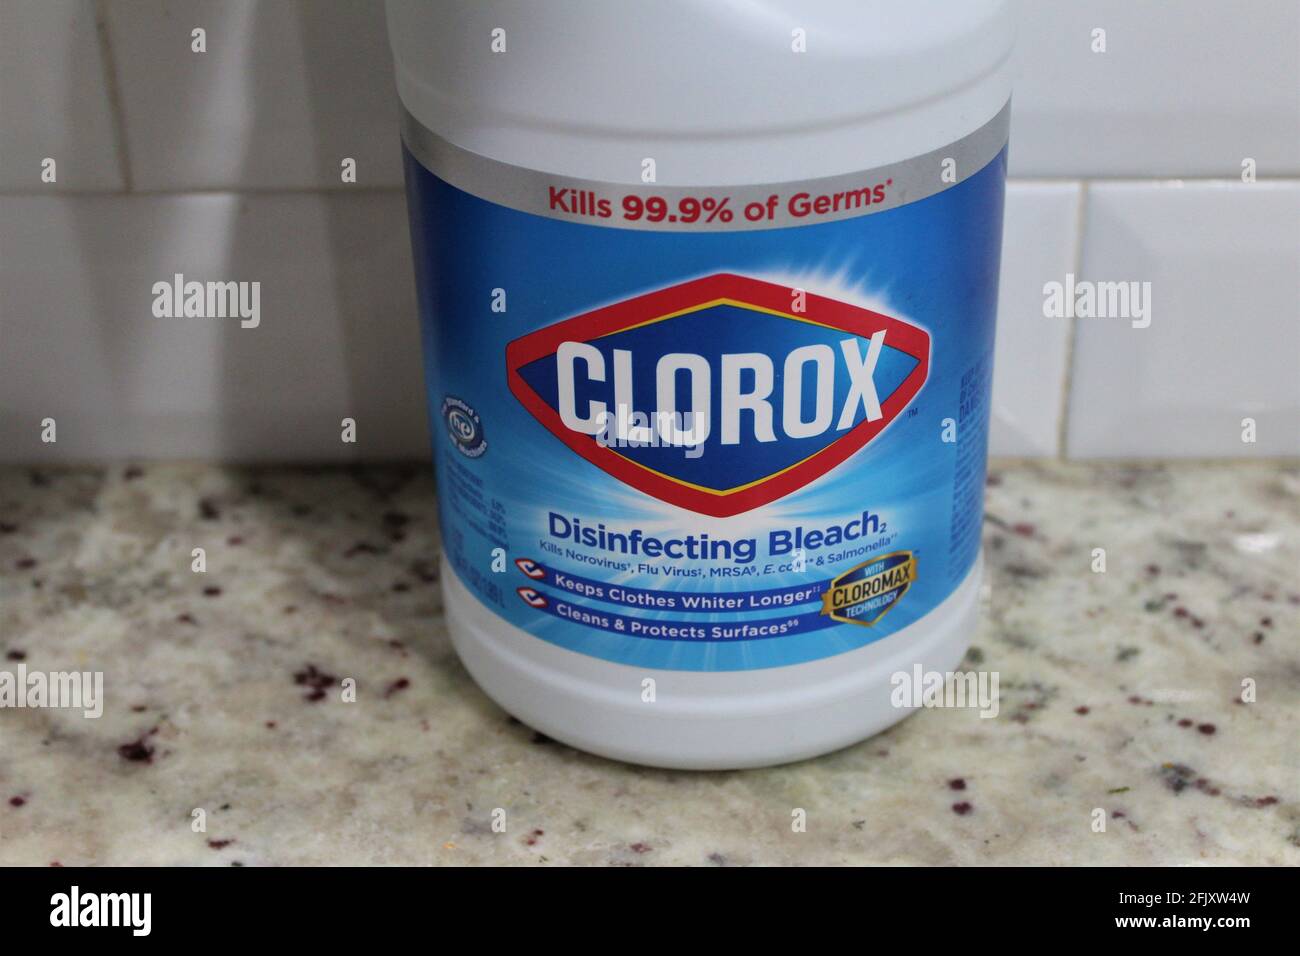 A closeup of a bottle of Clorox disinfecting bleach used for cleaning, isolated in a household kitchen setting. Stock Photo